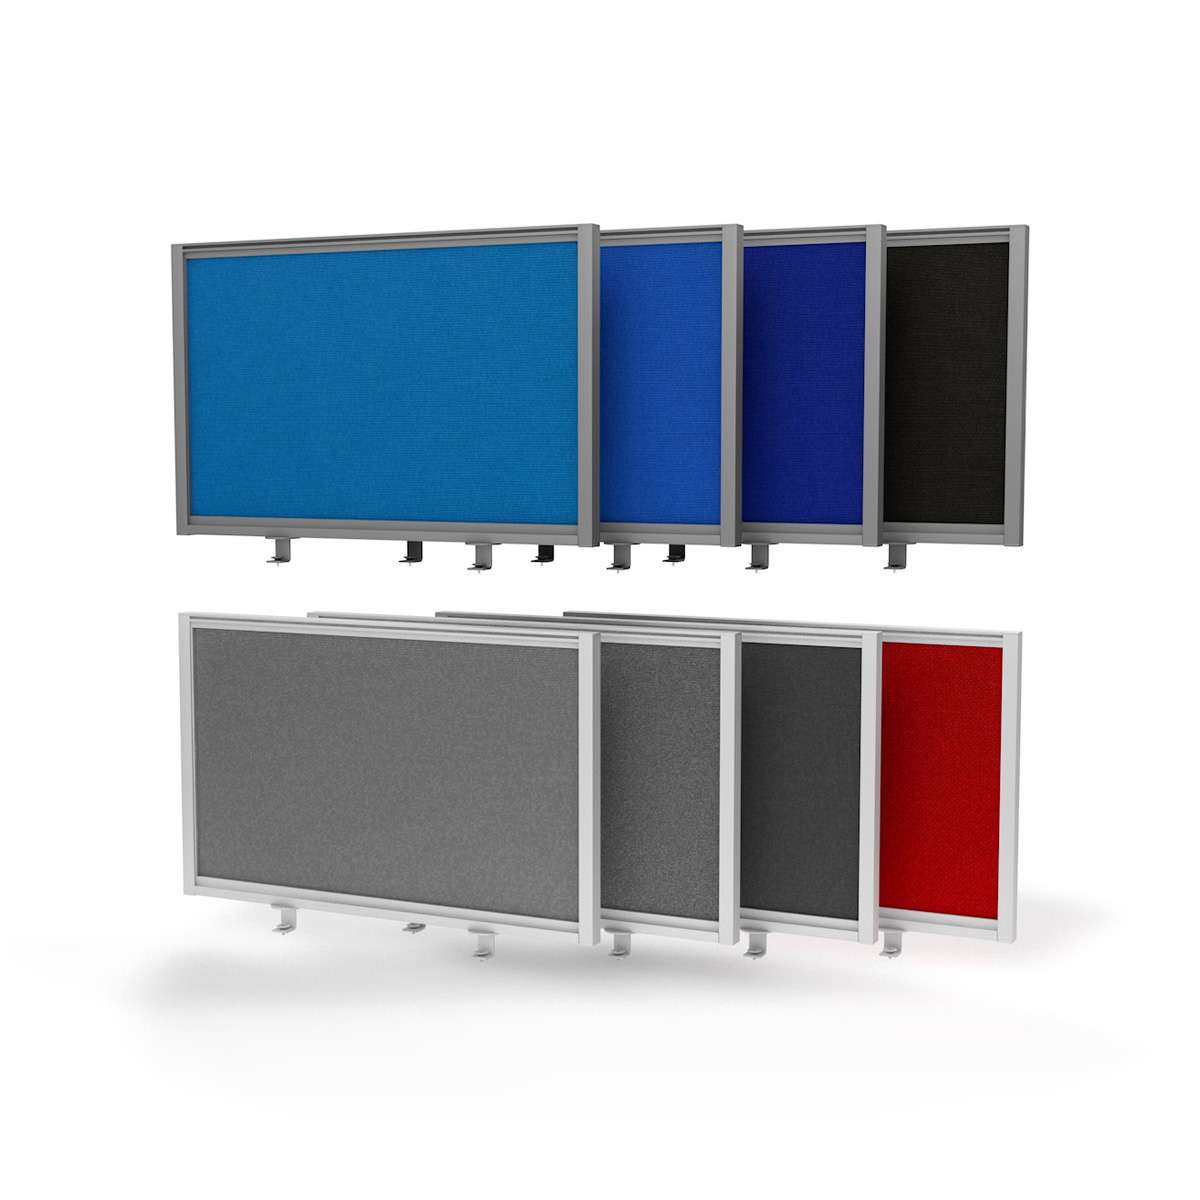 FRONTIER® Acoustic Desk Divider Screens Are Available in 8 Fabric Colours